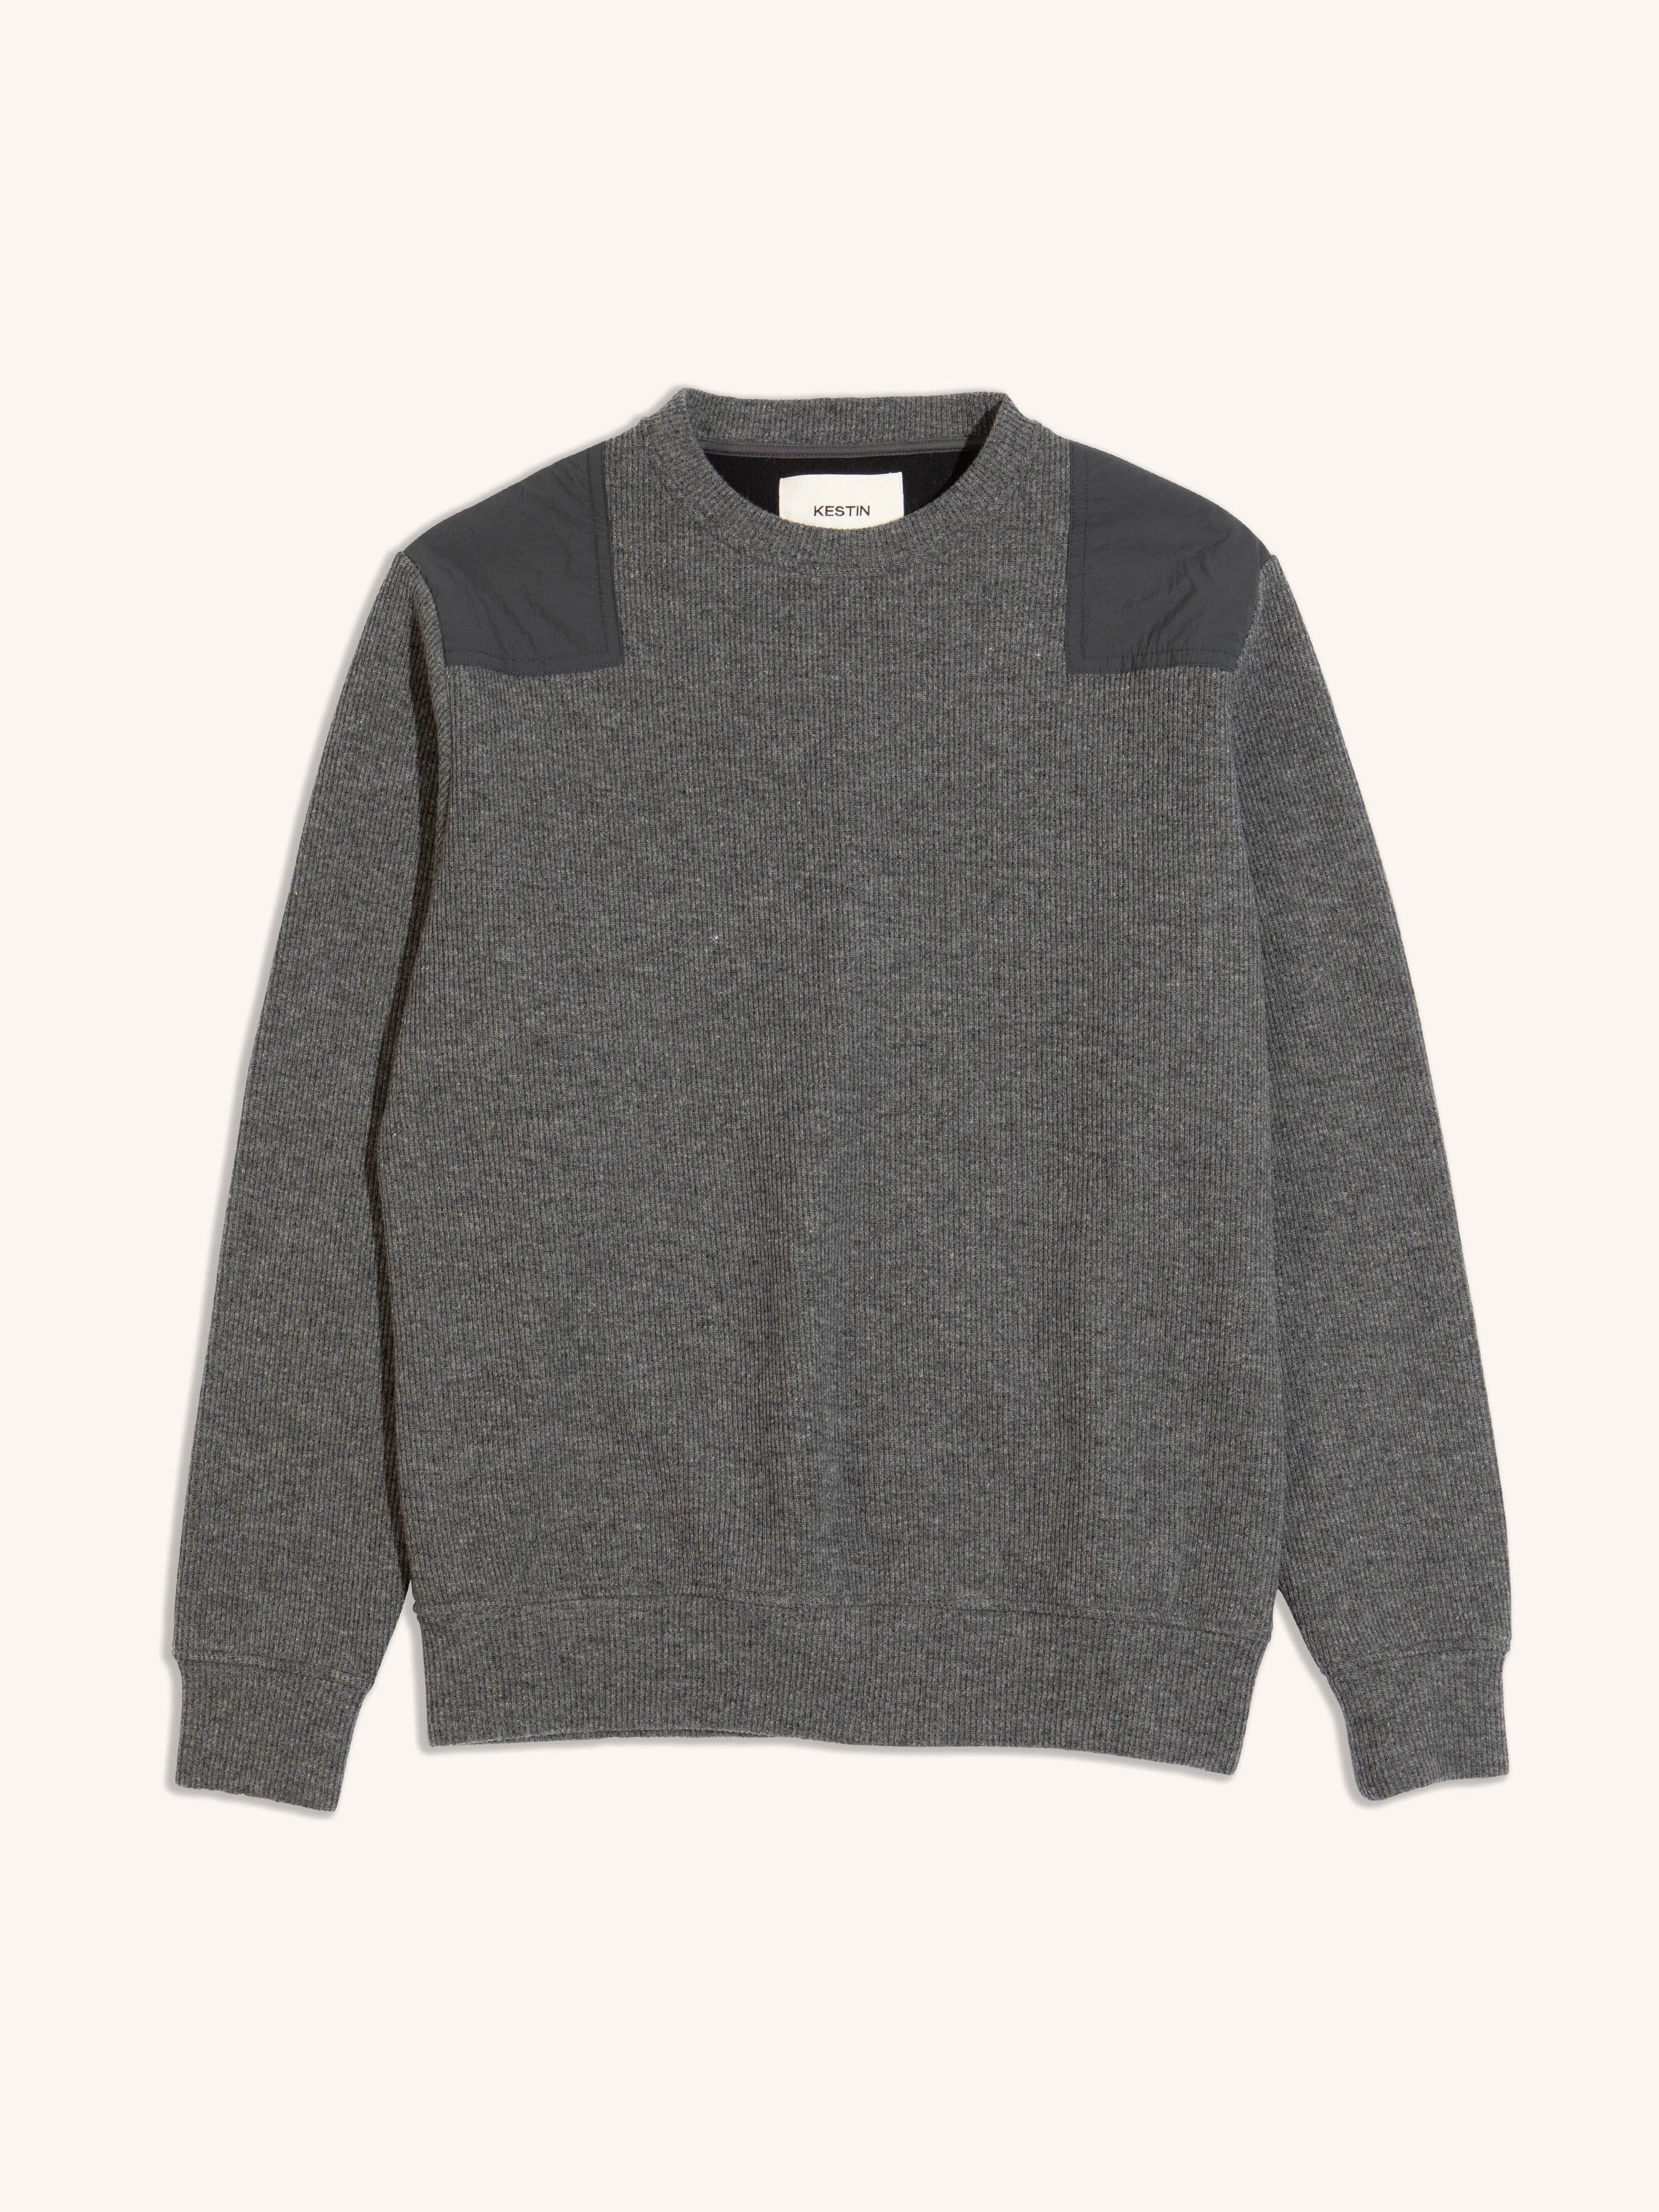 A knitted sweater from KESTIN, made from a technical Japanese wool in grey.